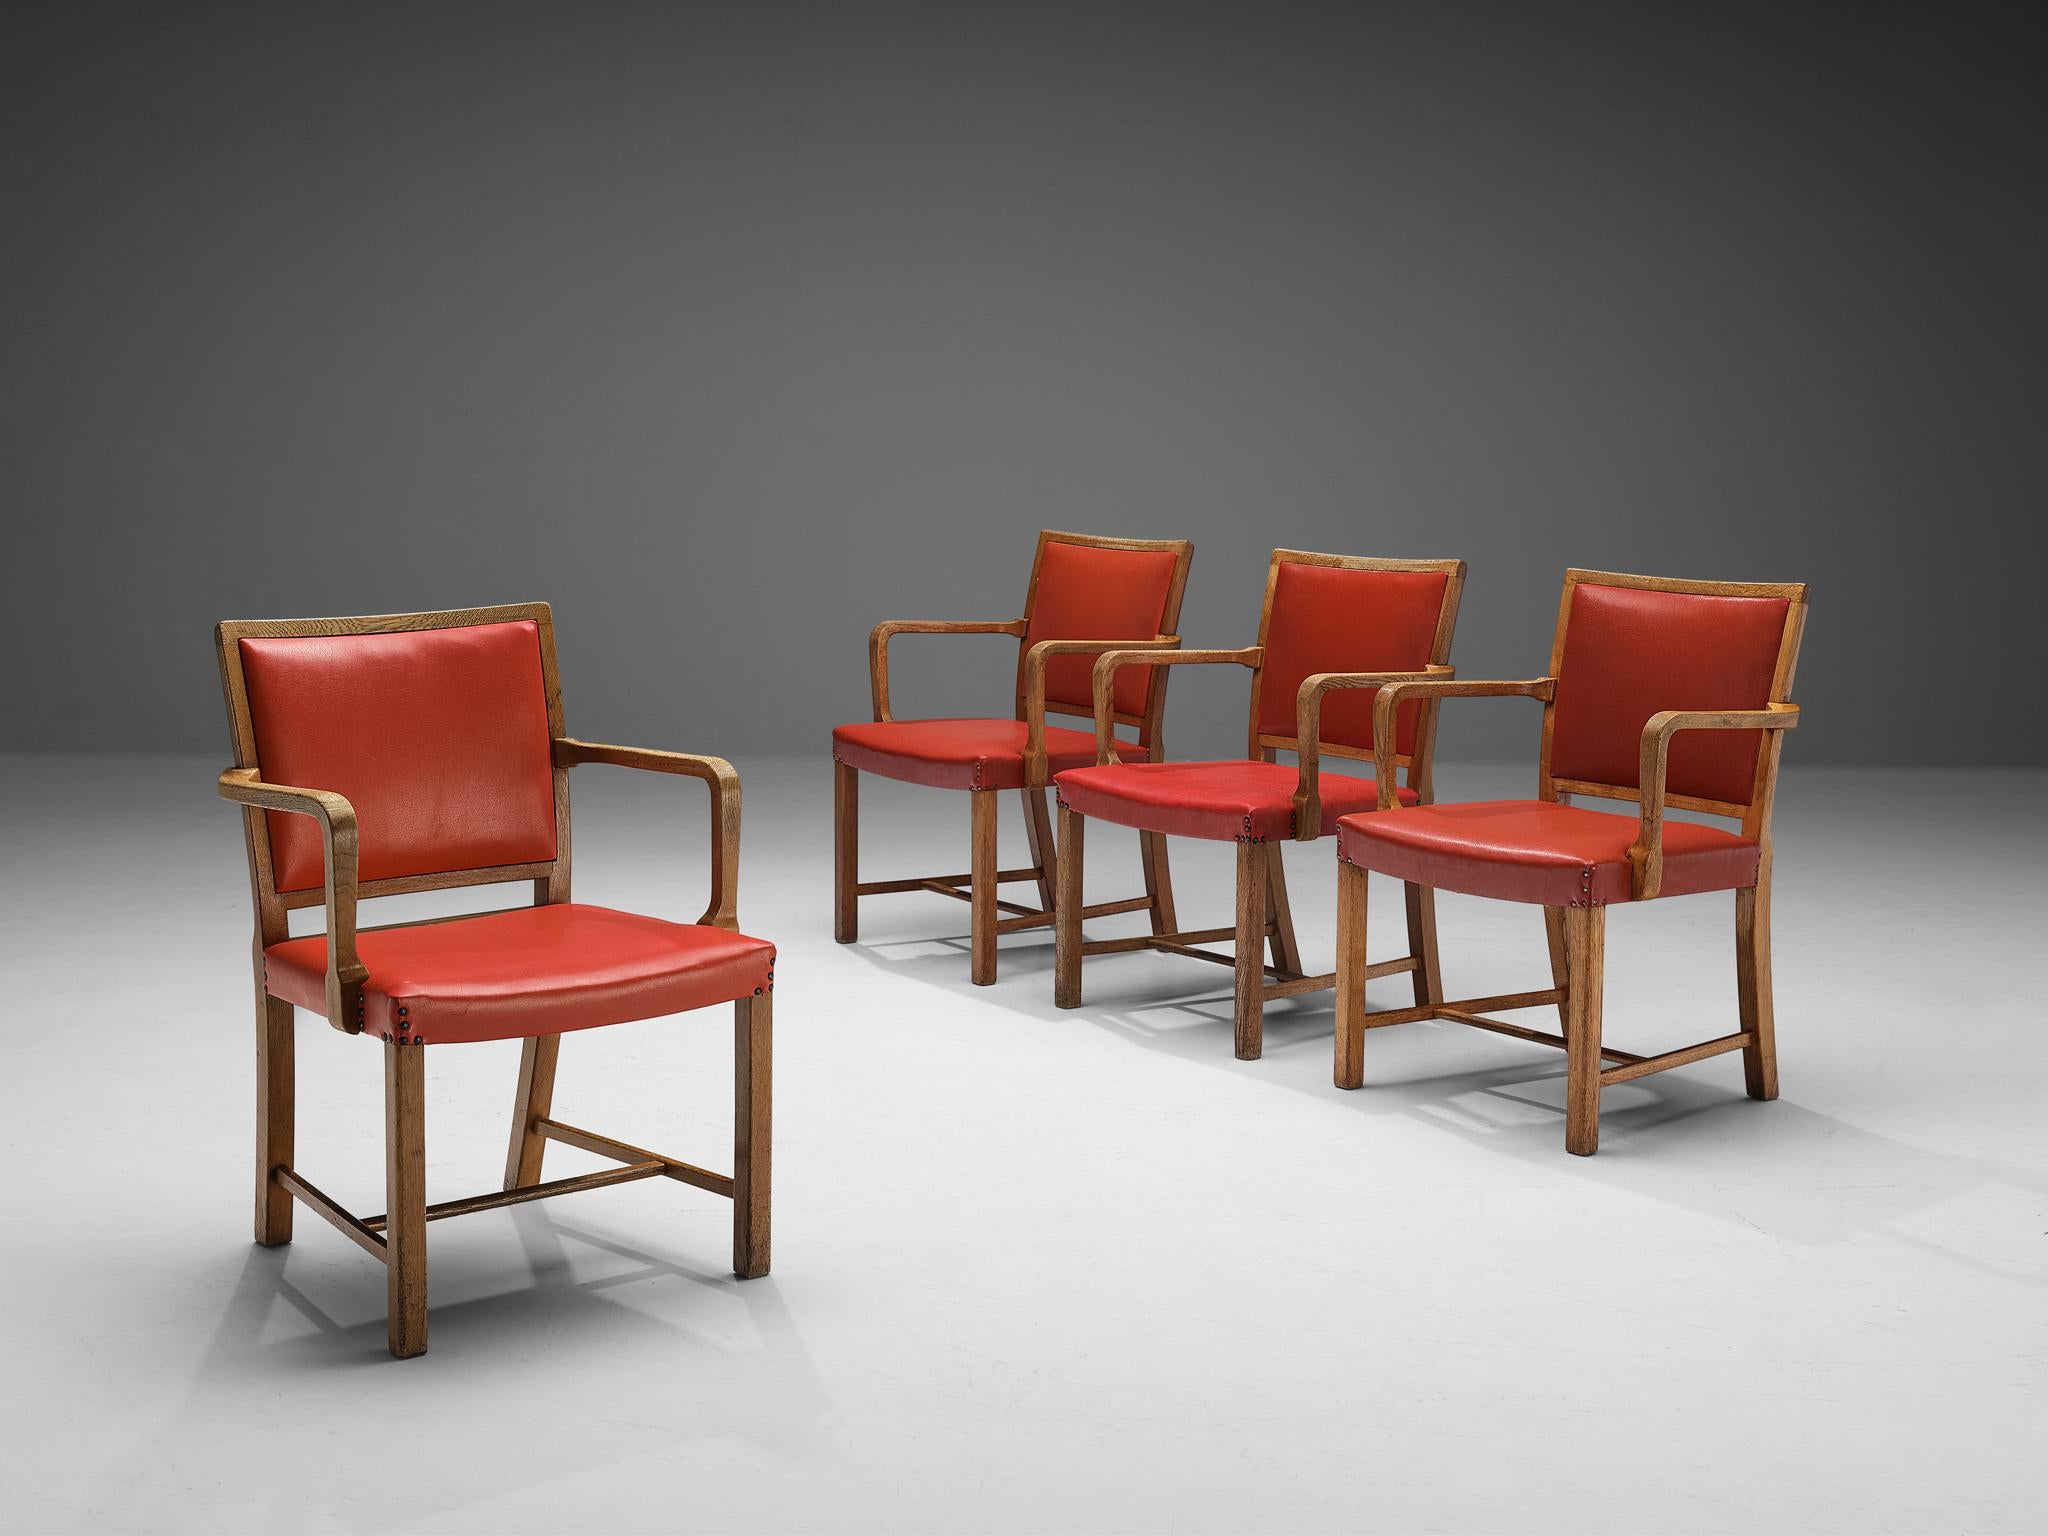 Set of four armchairs, leatherette, oak, brass, Europe, 1950s.

Set of four chairs made in Europe in the 1950s. This set of armchairs display a wide seat with a characteristic, sculptural frame. The titled legs with sharp edges create an overall